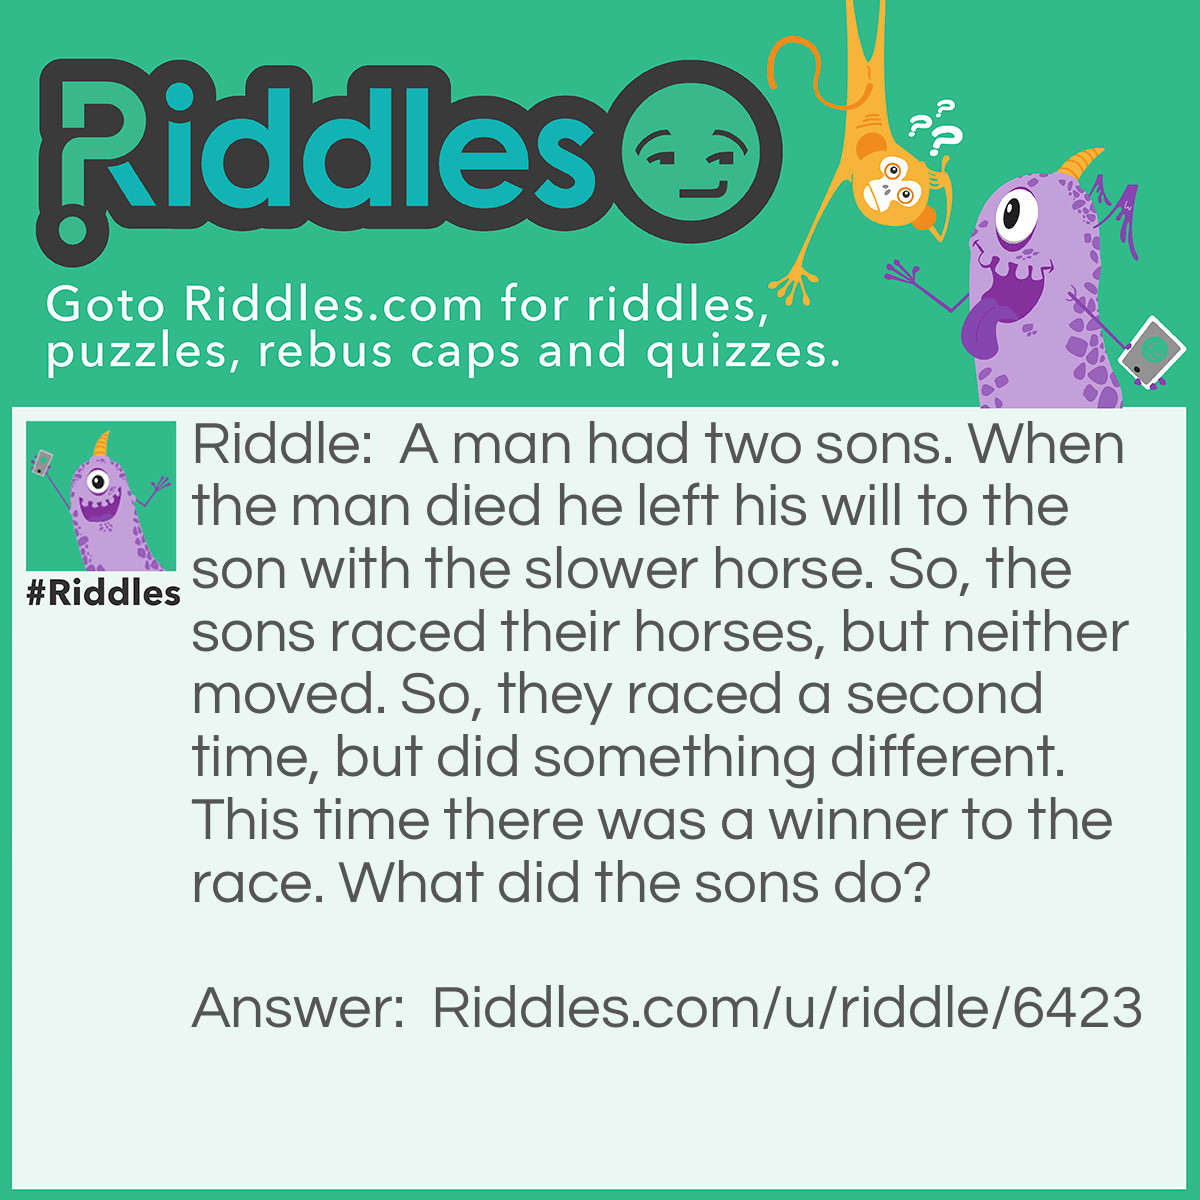 Riddle: A man had two sons. When the man died he left his will to the son with the slower horse. So, the sons raced their horses, but neither moved. So, they raced a second time, but did something different. This time there was a winner to the race. What did the sons do? Answer: The sons swapped horses, so if the son won the race, their horse was slower.